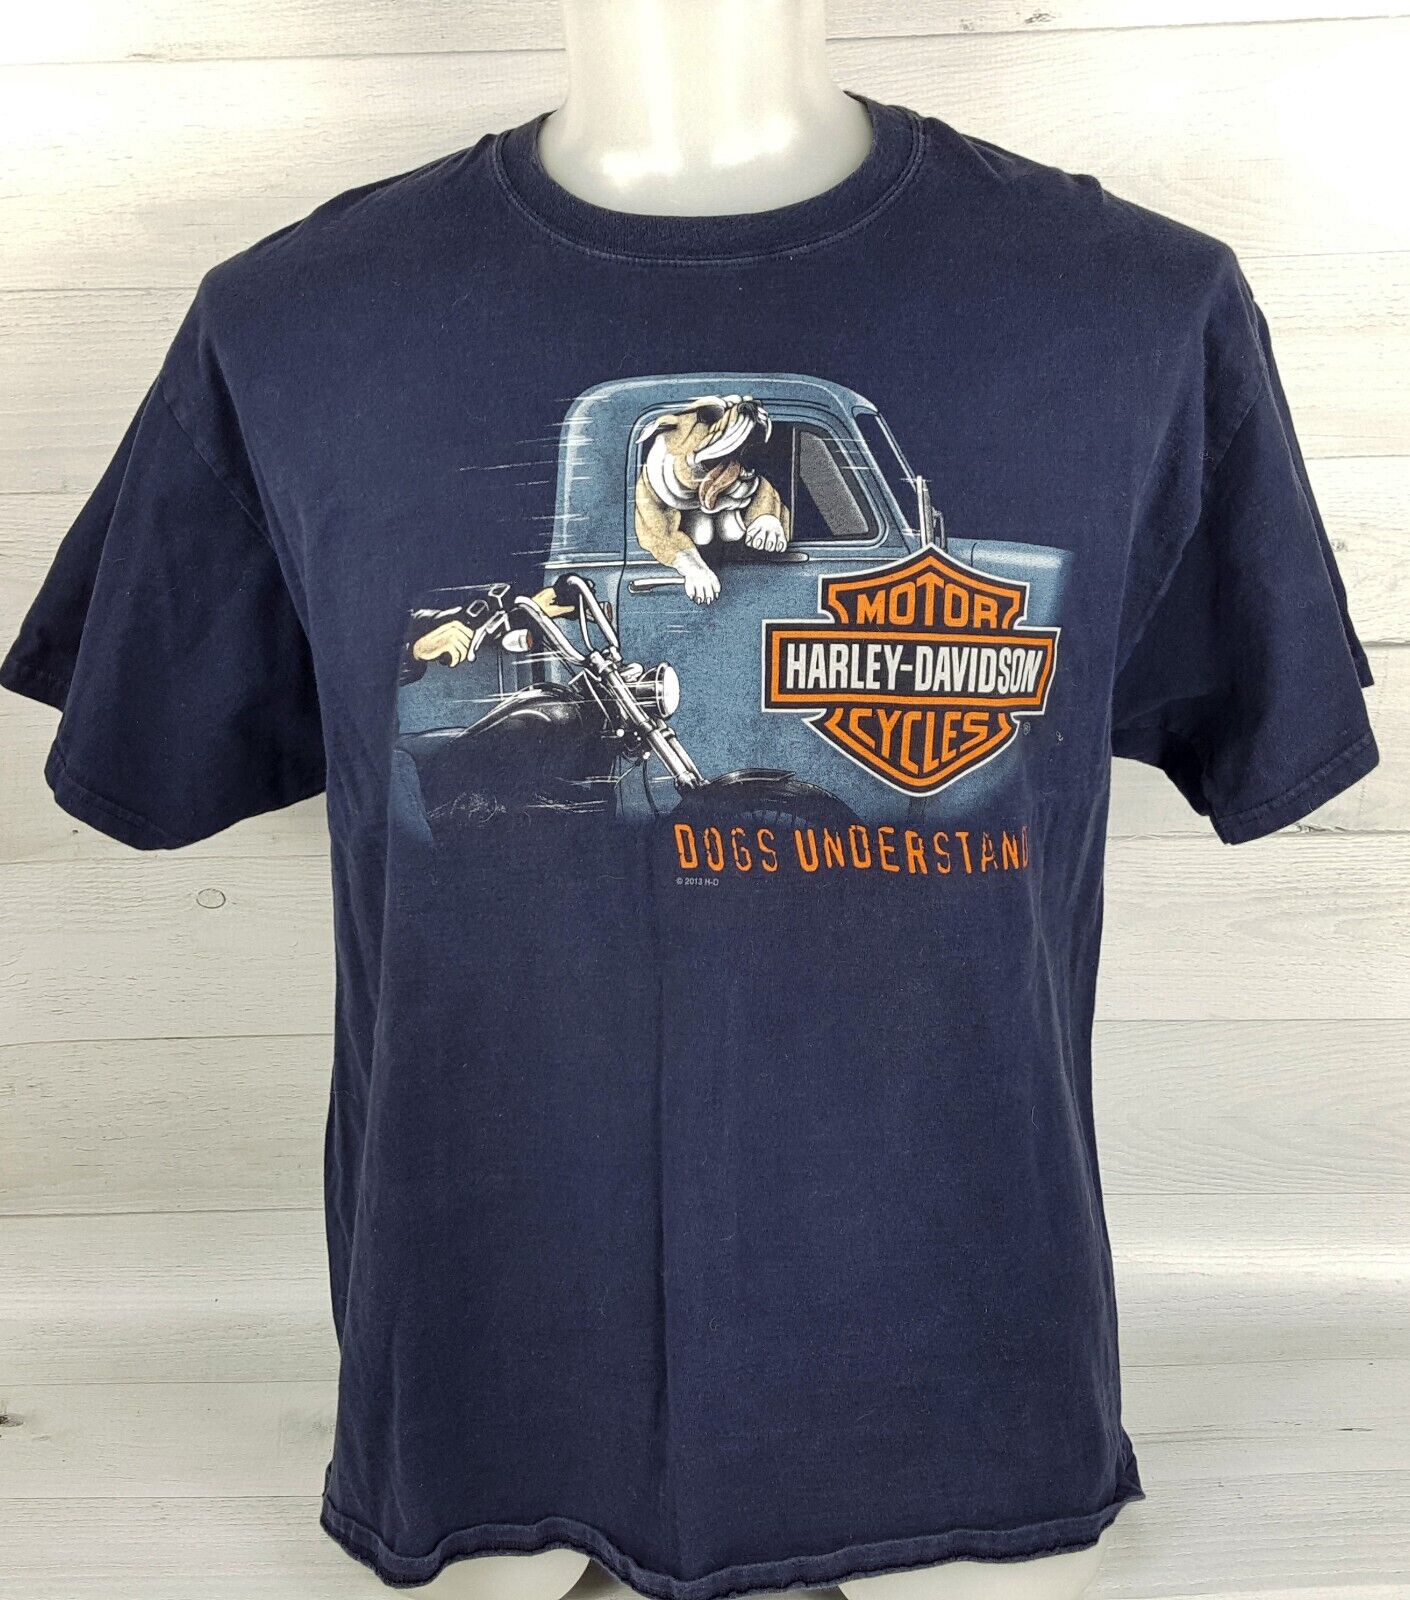 Harley Davidson Motorcycle XL Hanes Beefy Tee T-Shirt Dogs Understand Doc's Wisc